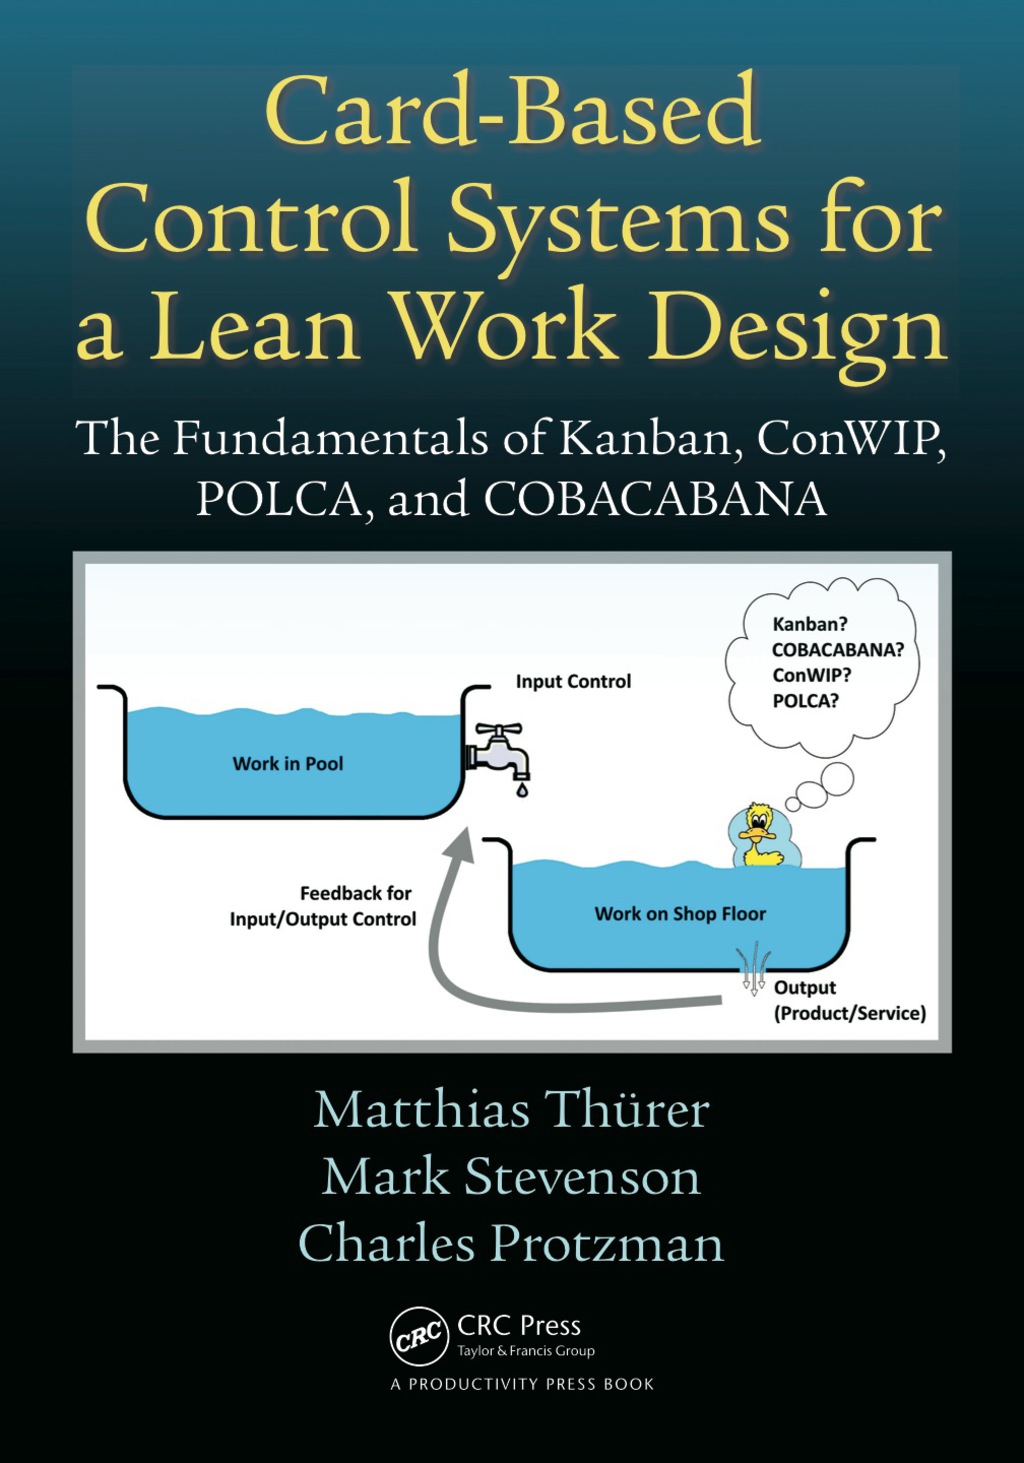 Card-Based Control Systems for a Lean Work Design - 1st Edition (eBook Rental)